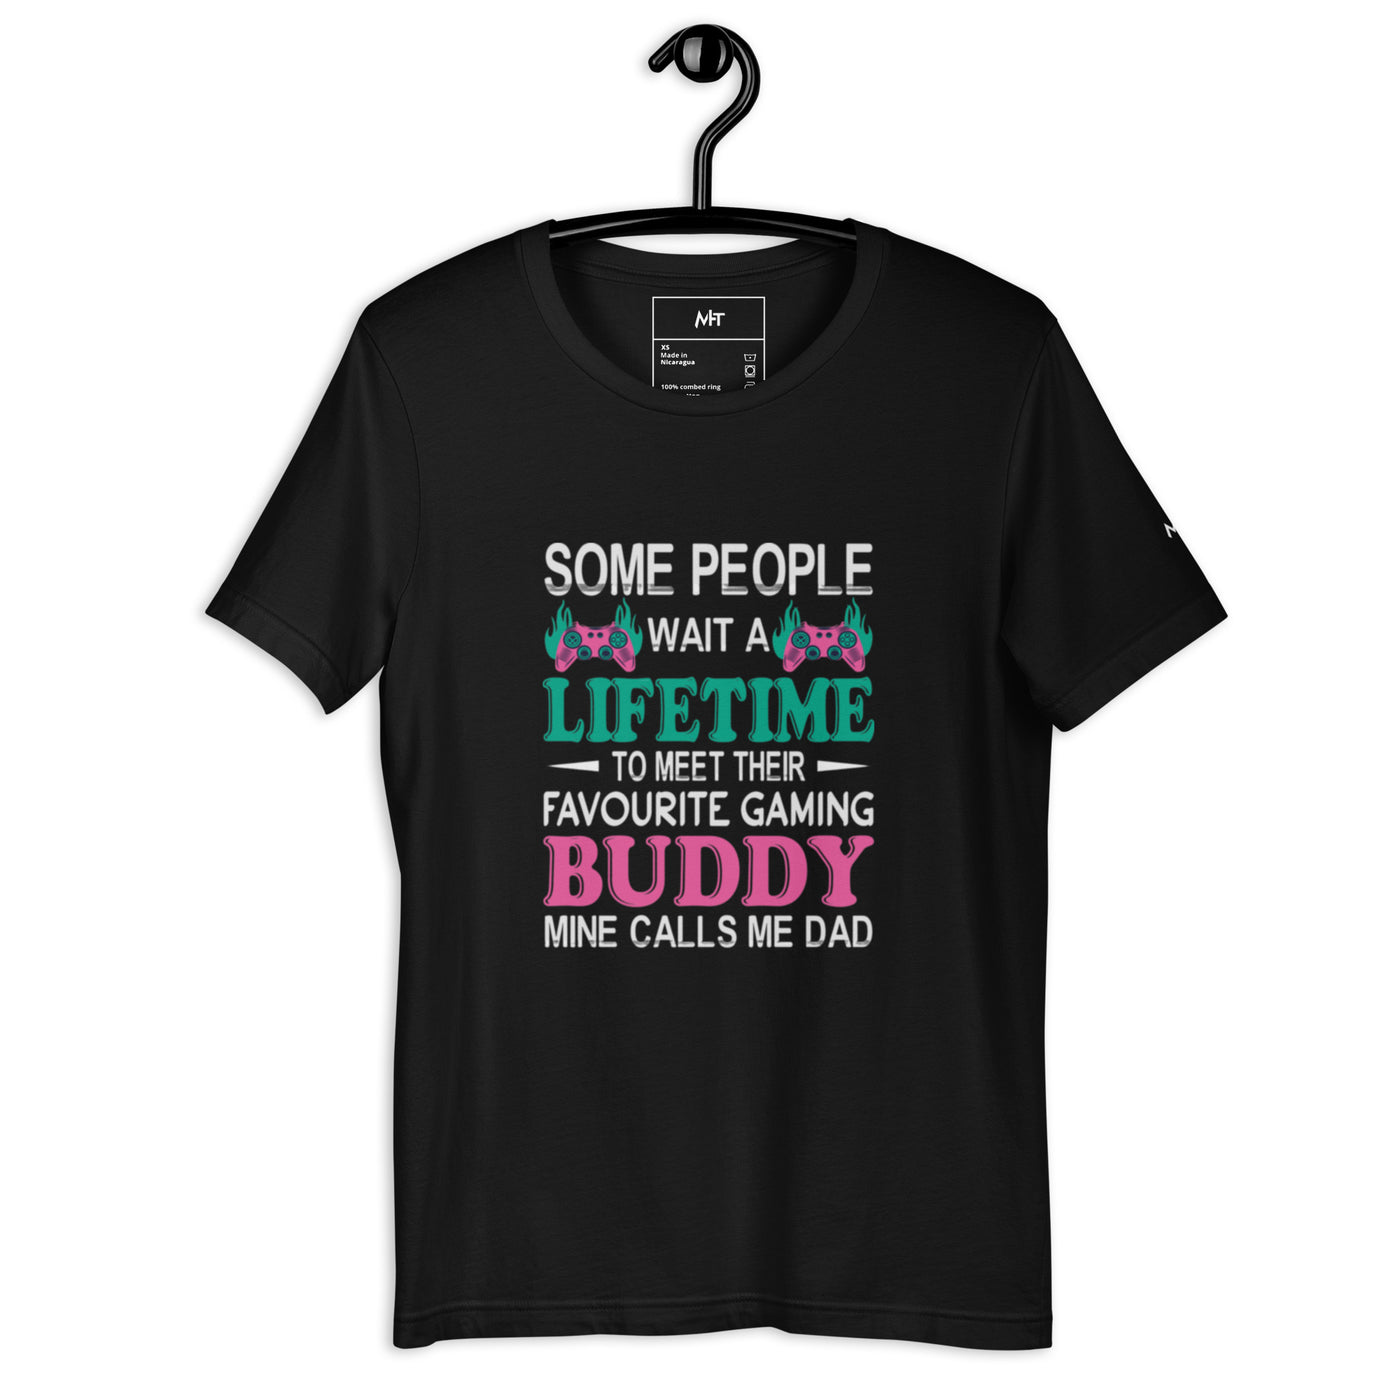 Some people wait a lifetime to meet their Favorite Gaming Partner - Unisex t-shirt